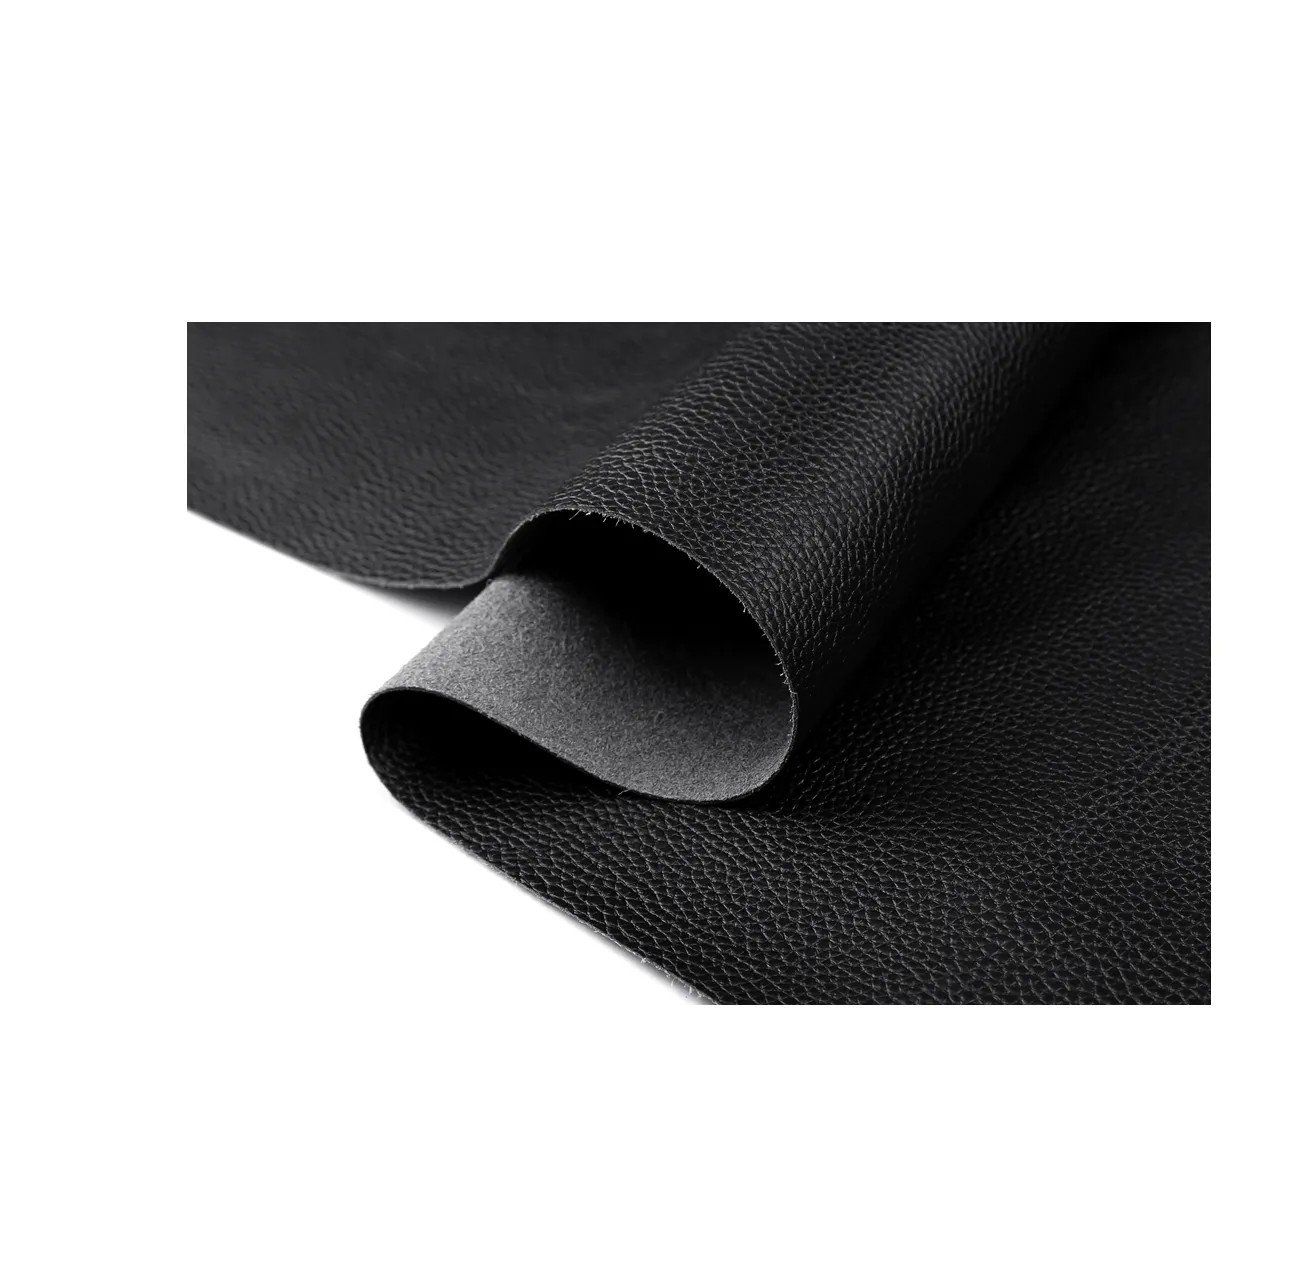 Superior Quality Pu Leather Litchi Grain Synthetic Leather Handbag Automotive Supplies Fabric